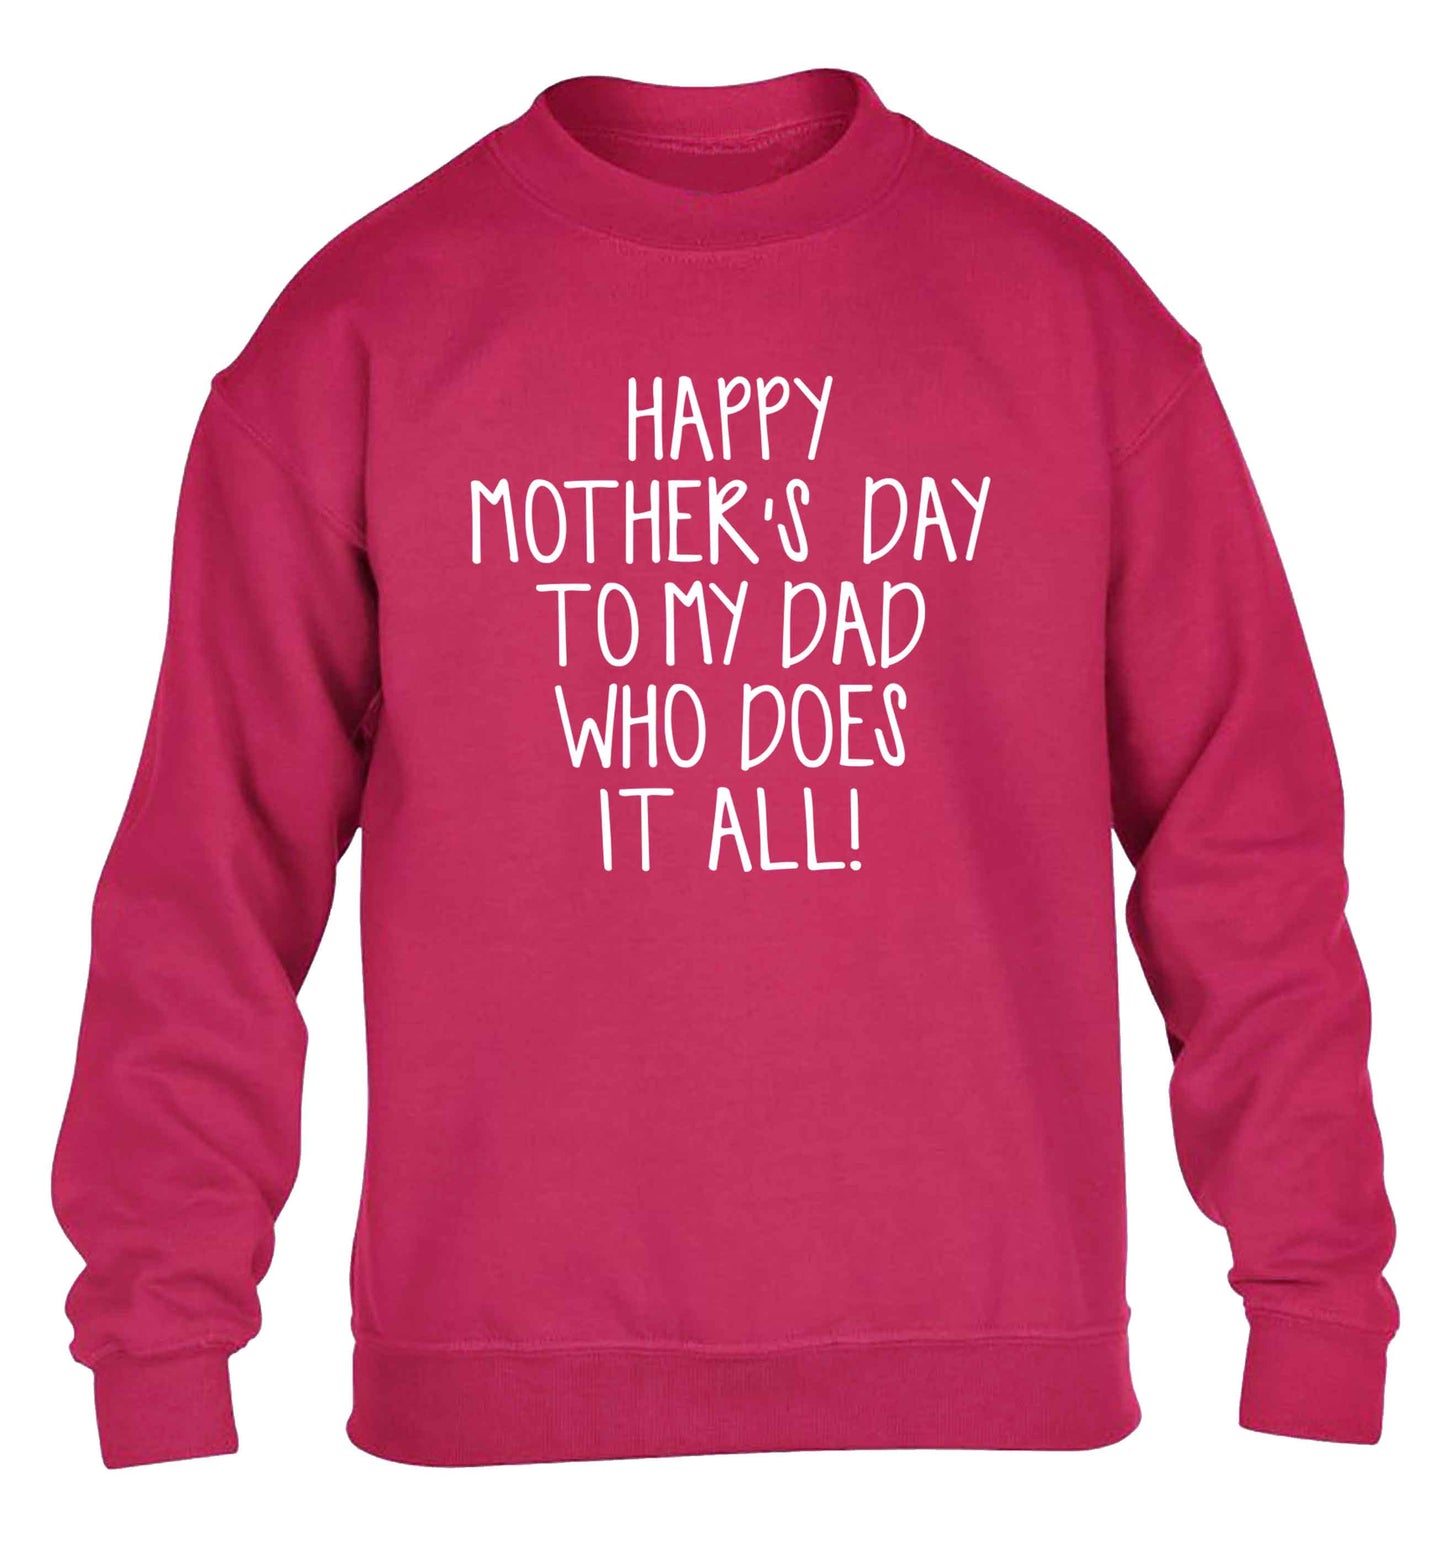 Happy mother's day to my dad who does it all! children's pink sweater 12-13 Years